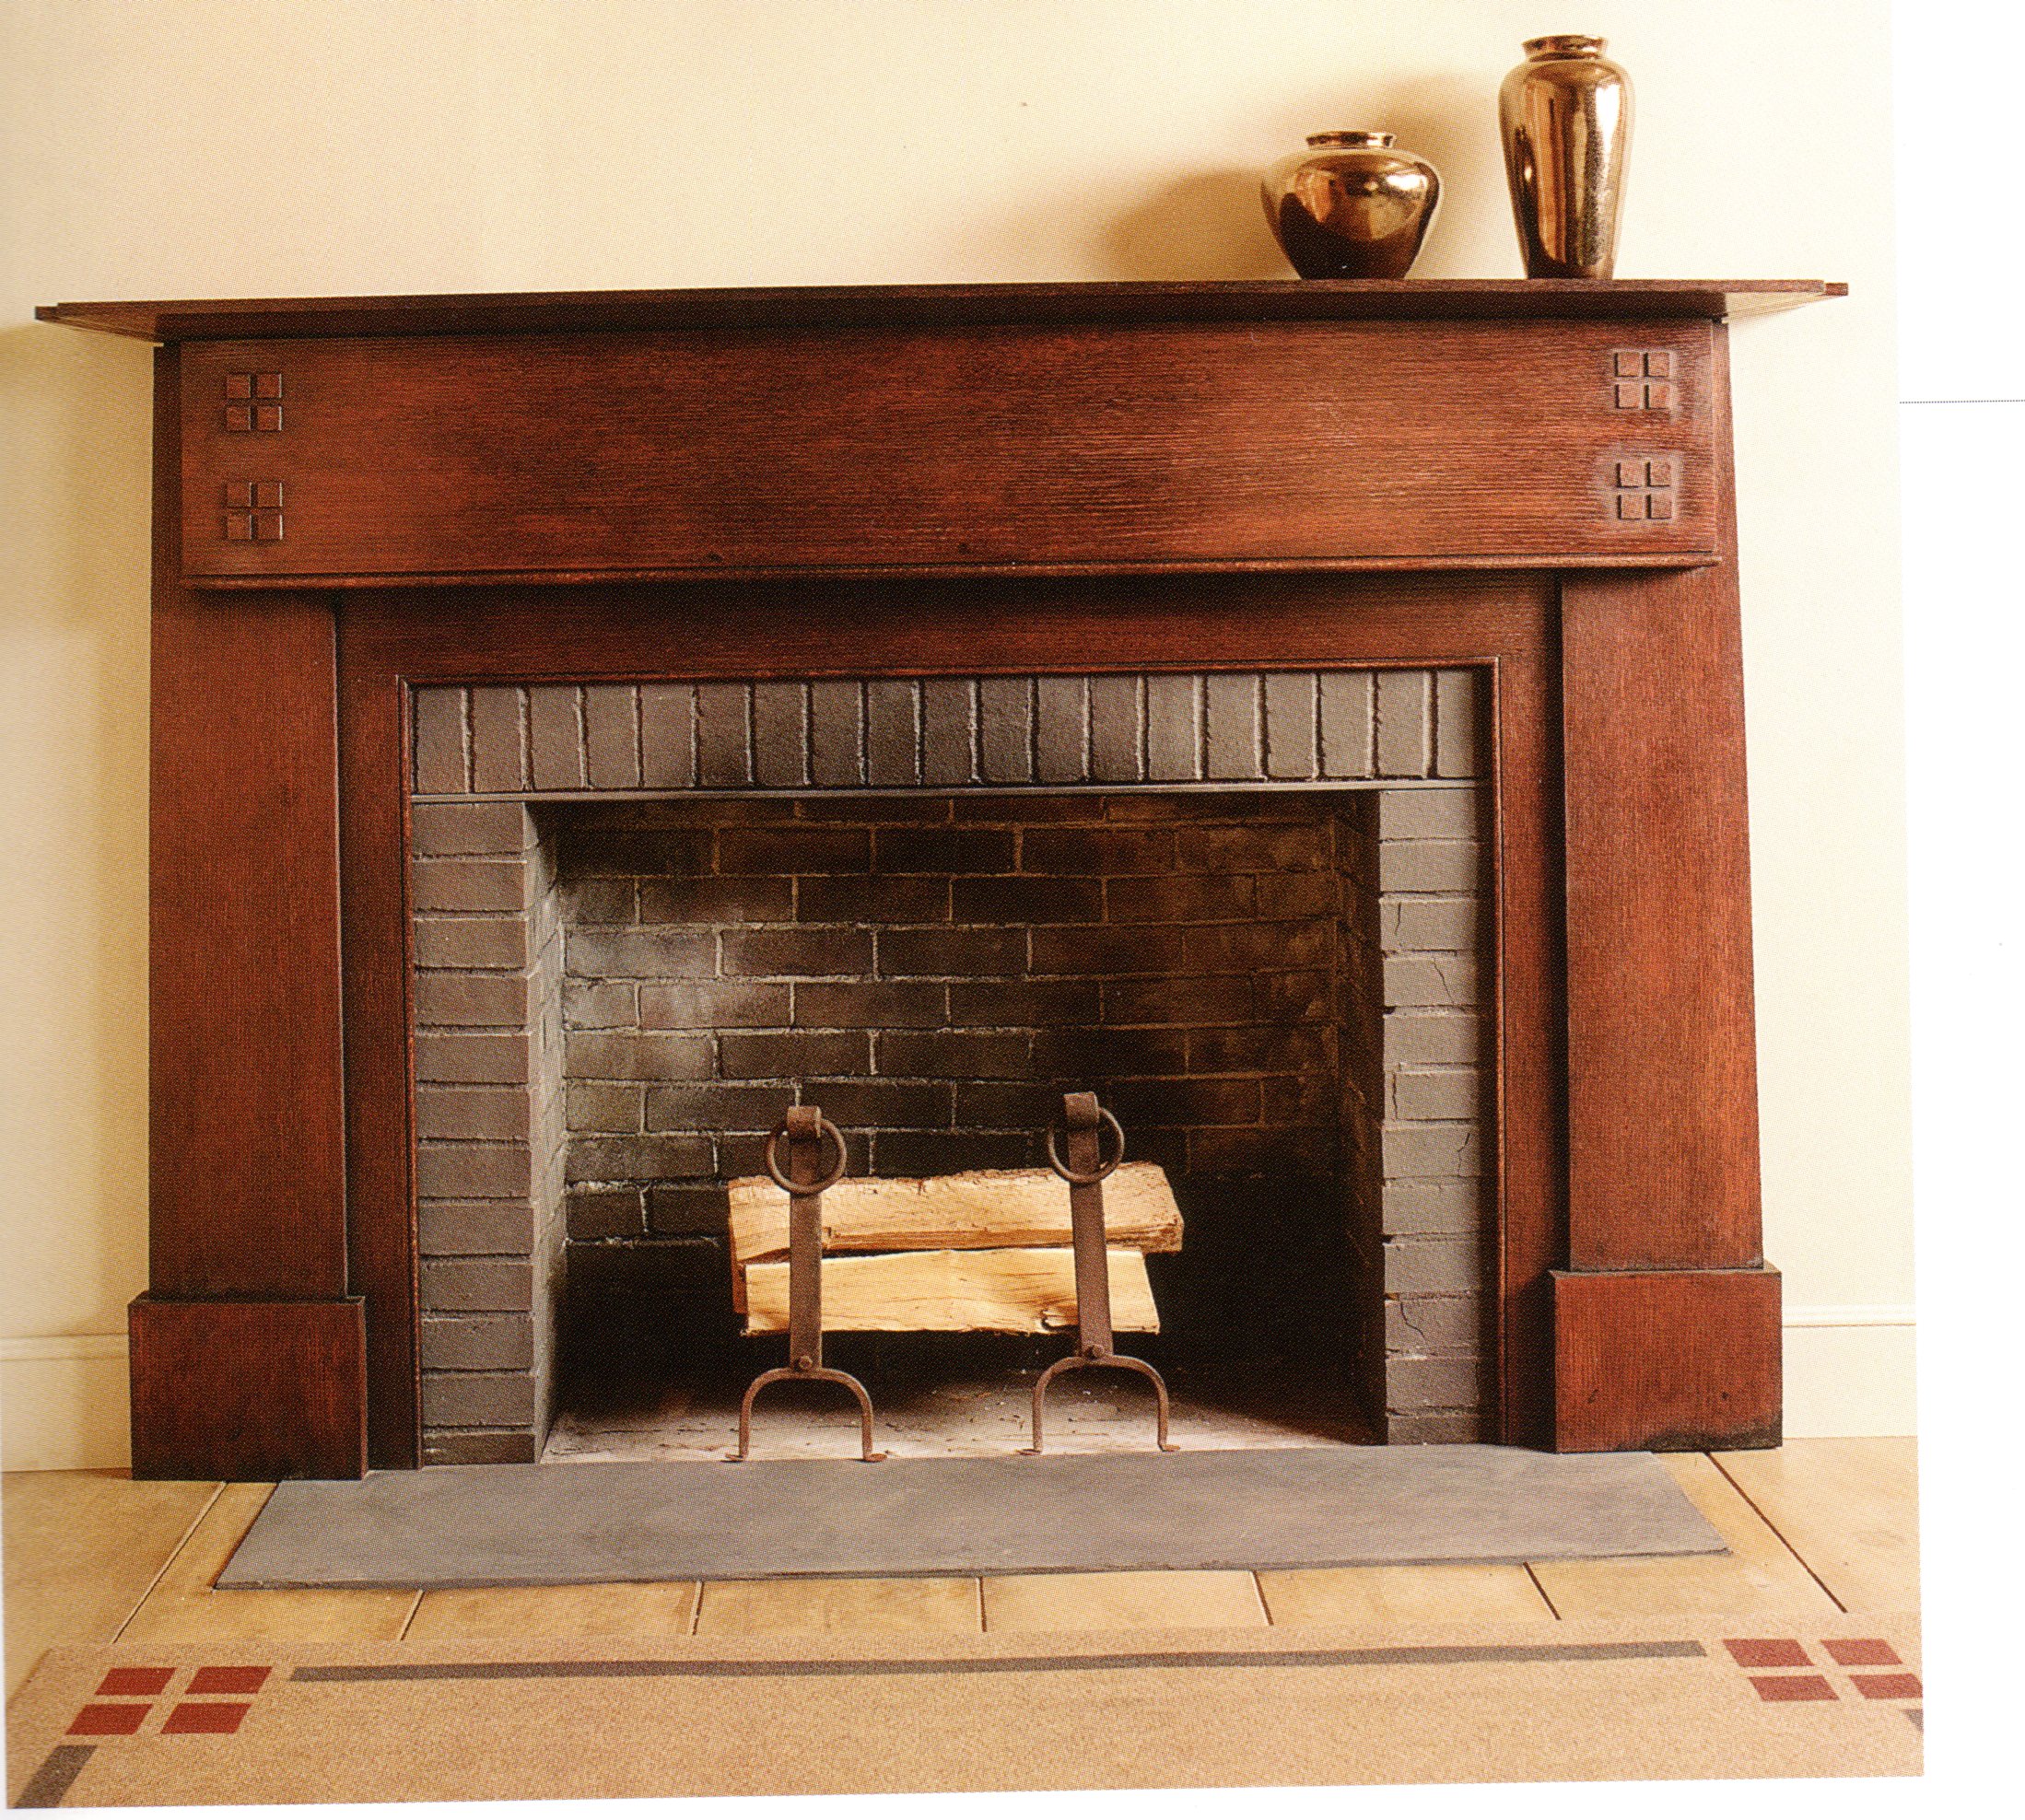 How to Build A Fireplace Mantel Shelf with Crown Molding Luxury Craftsman Style Mantel & Bookcases